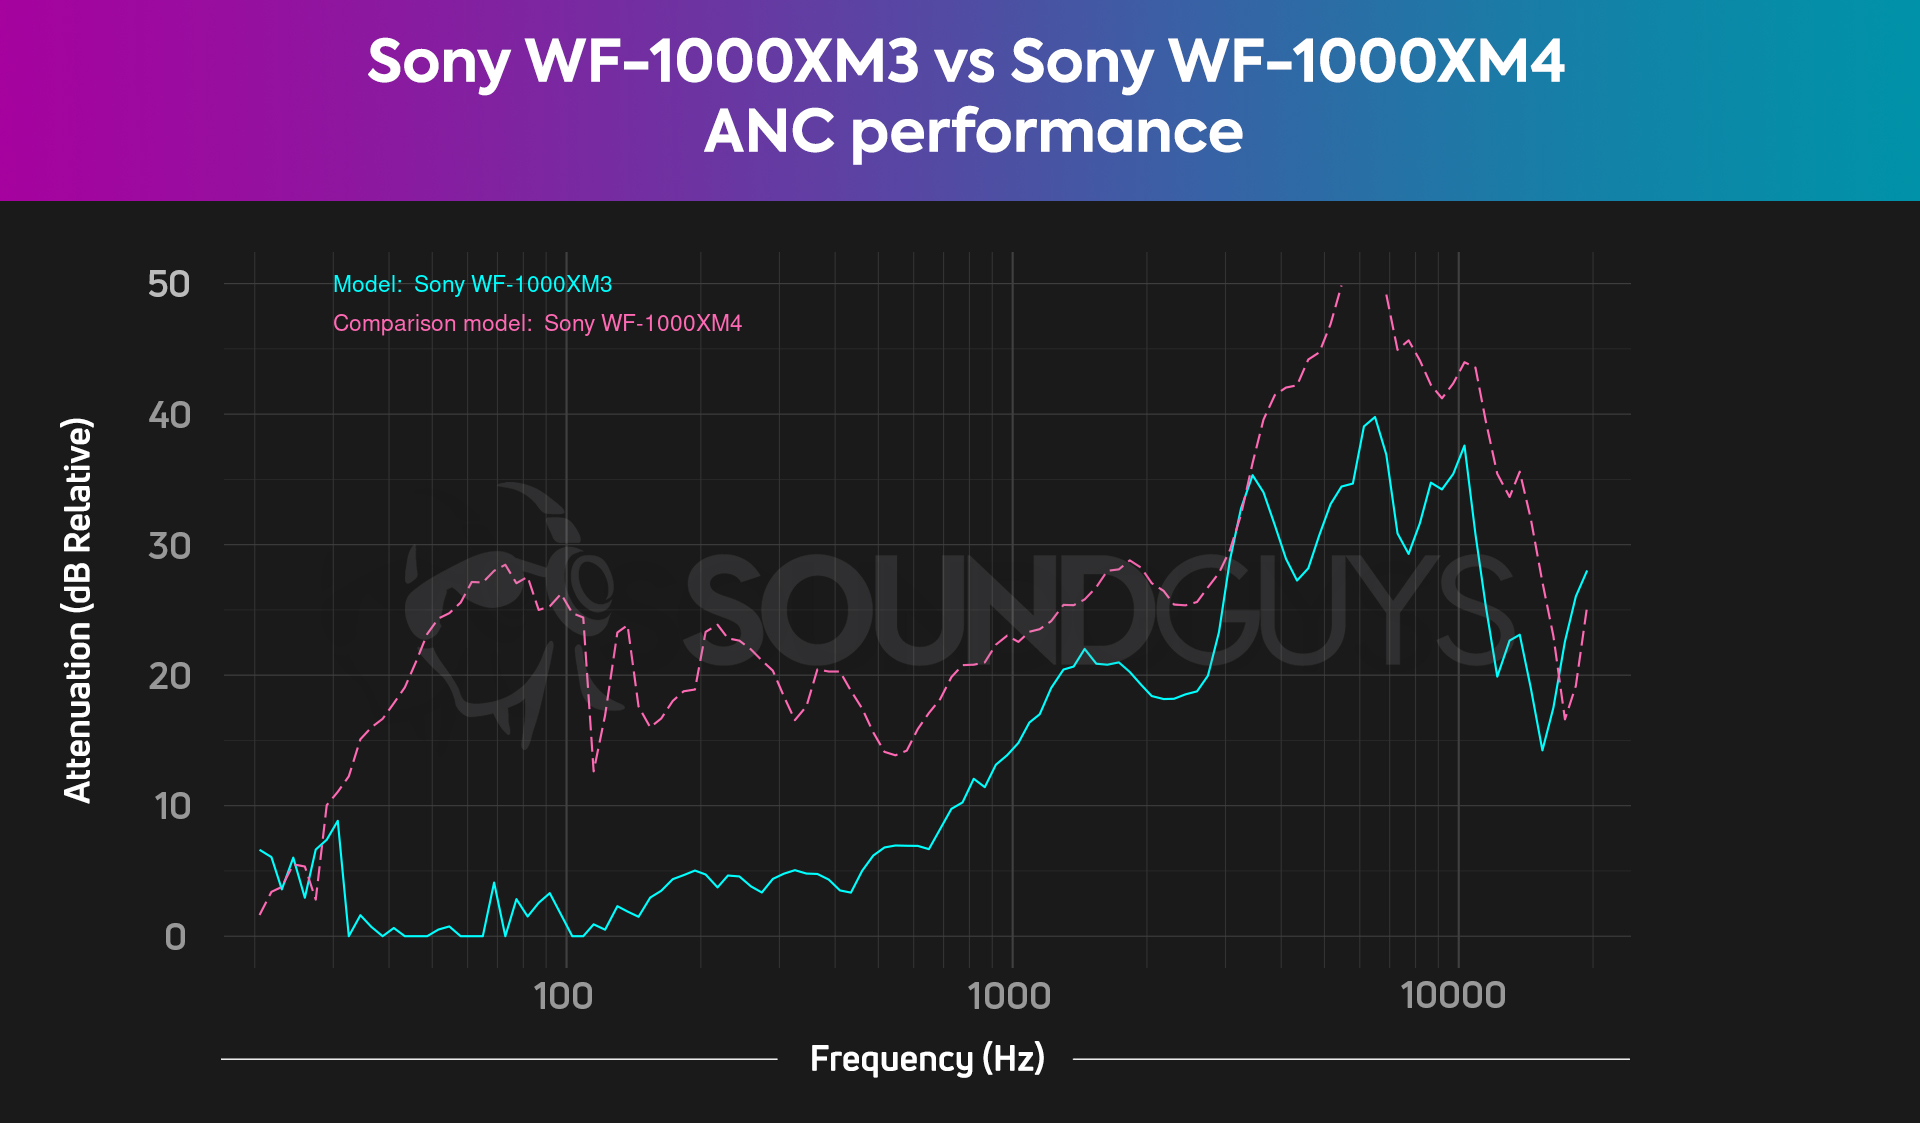 A comparative chart of the combined ANC and isolation of the Sony WF-1000XM3 and the Sony WF-1000XM4.